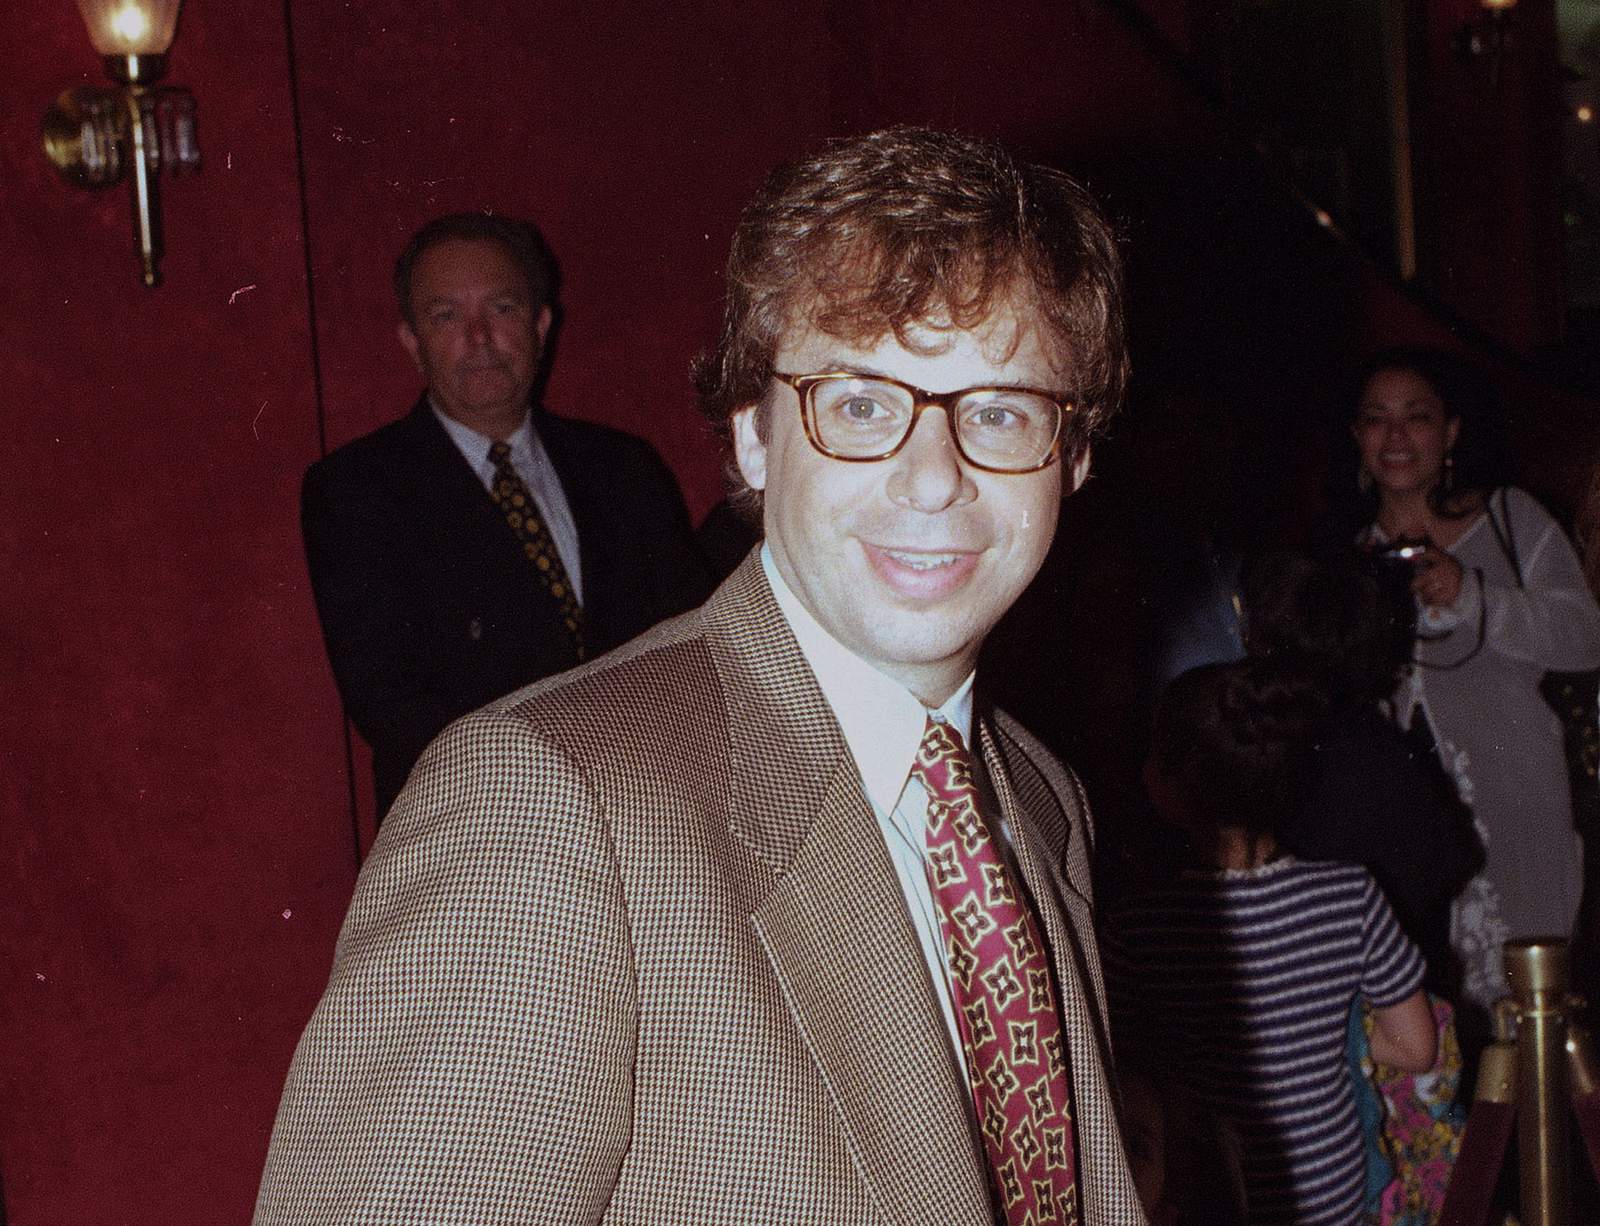 Actor Rick Moranis sucker punched while walking in NYC